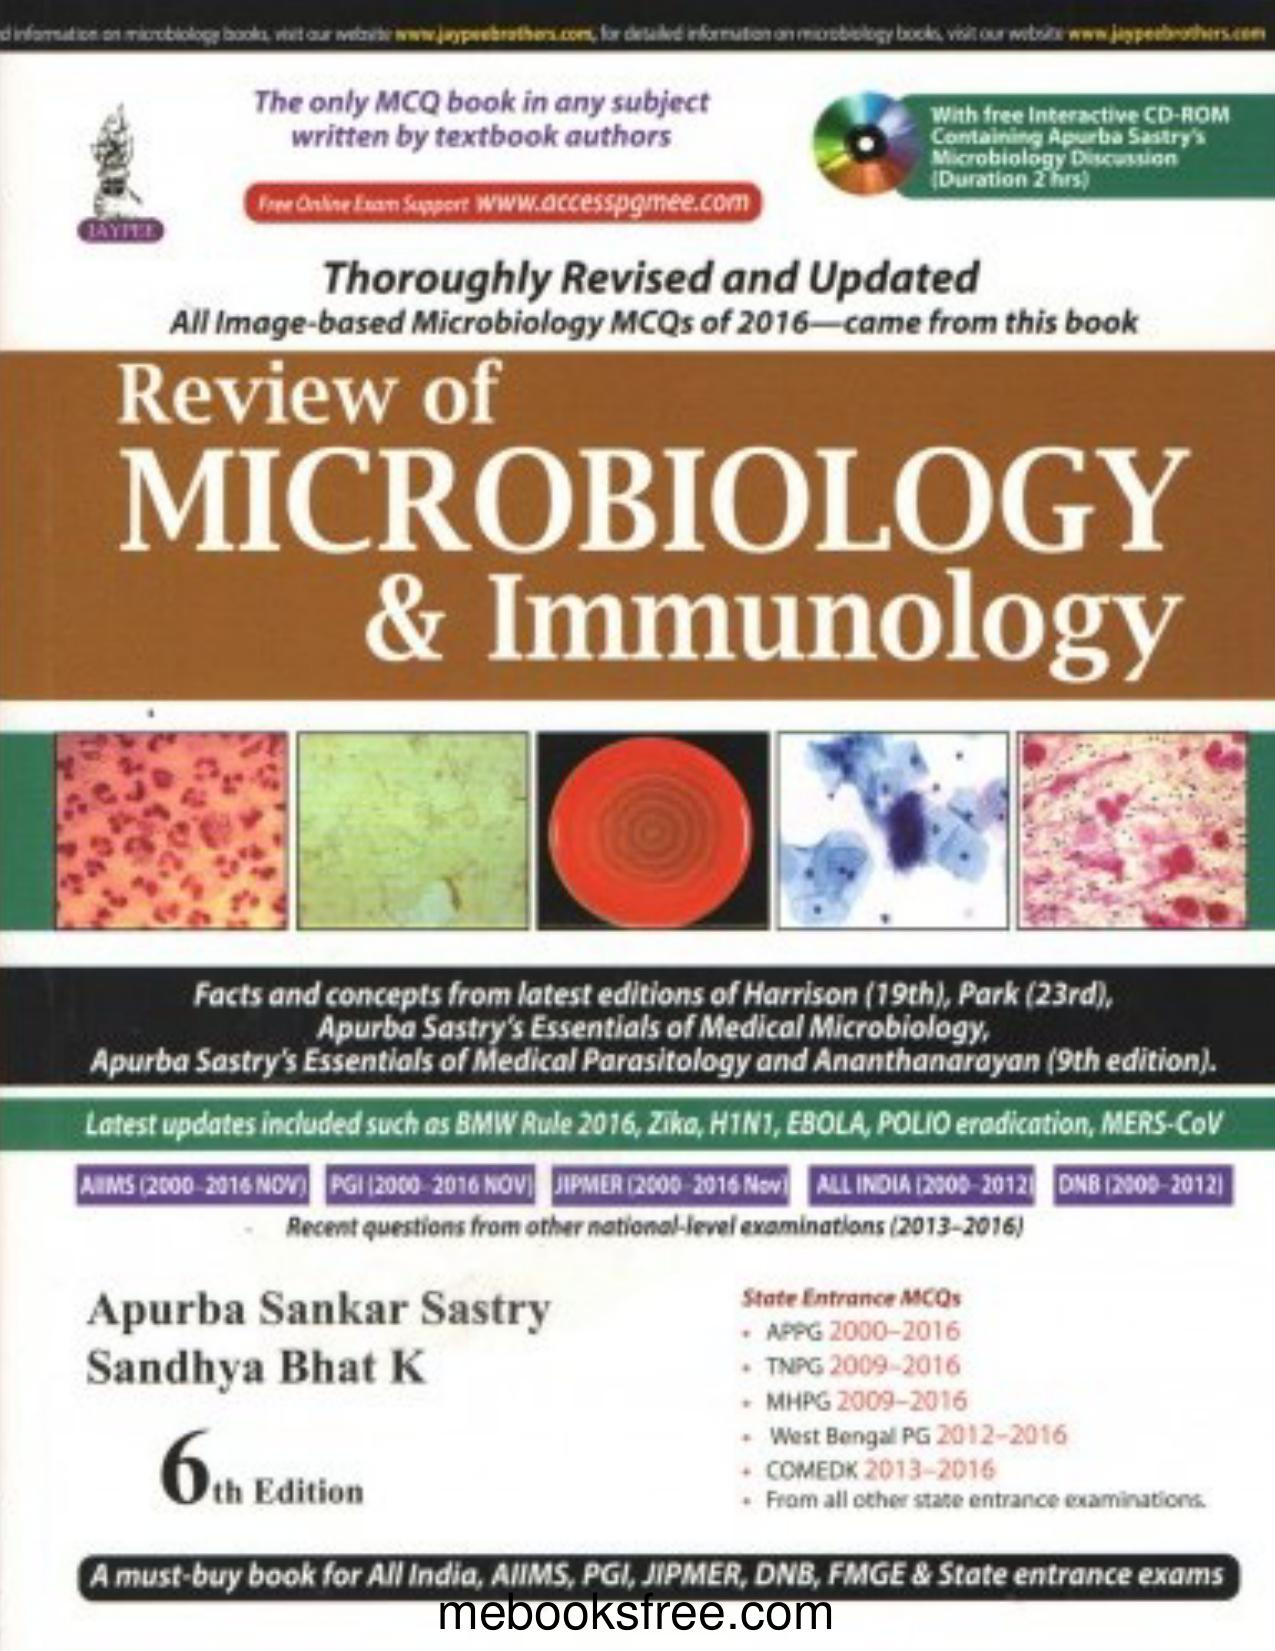 Review of microbiology and immunology (2018)